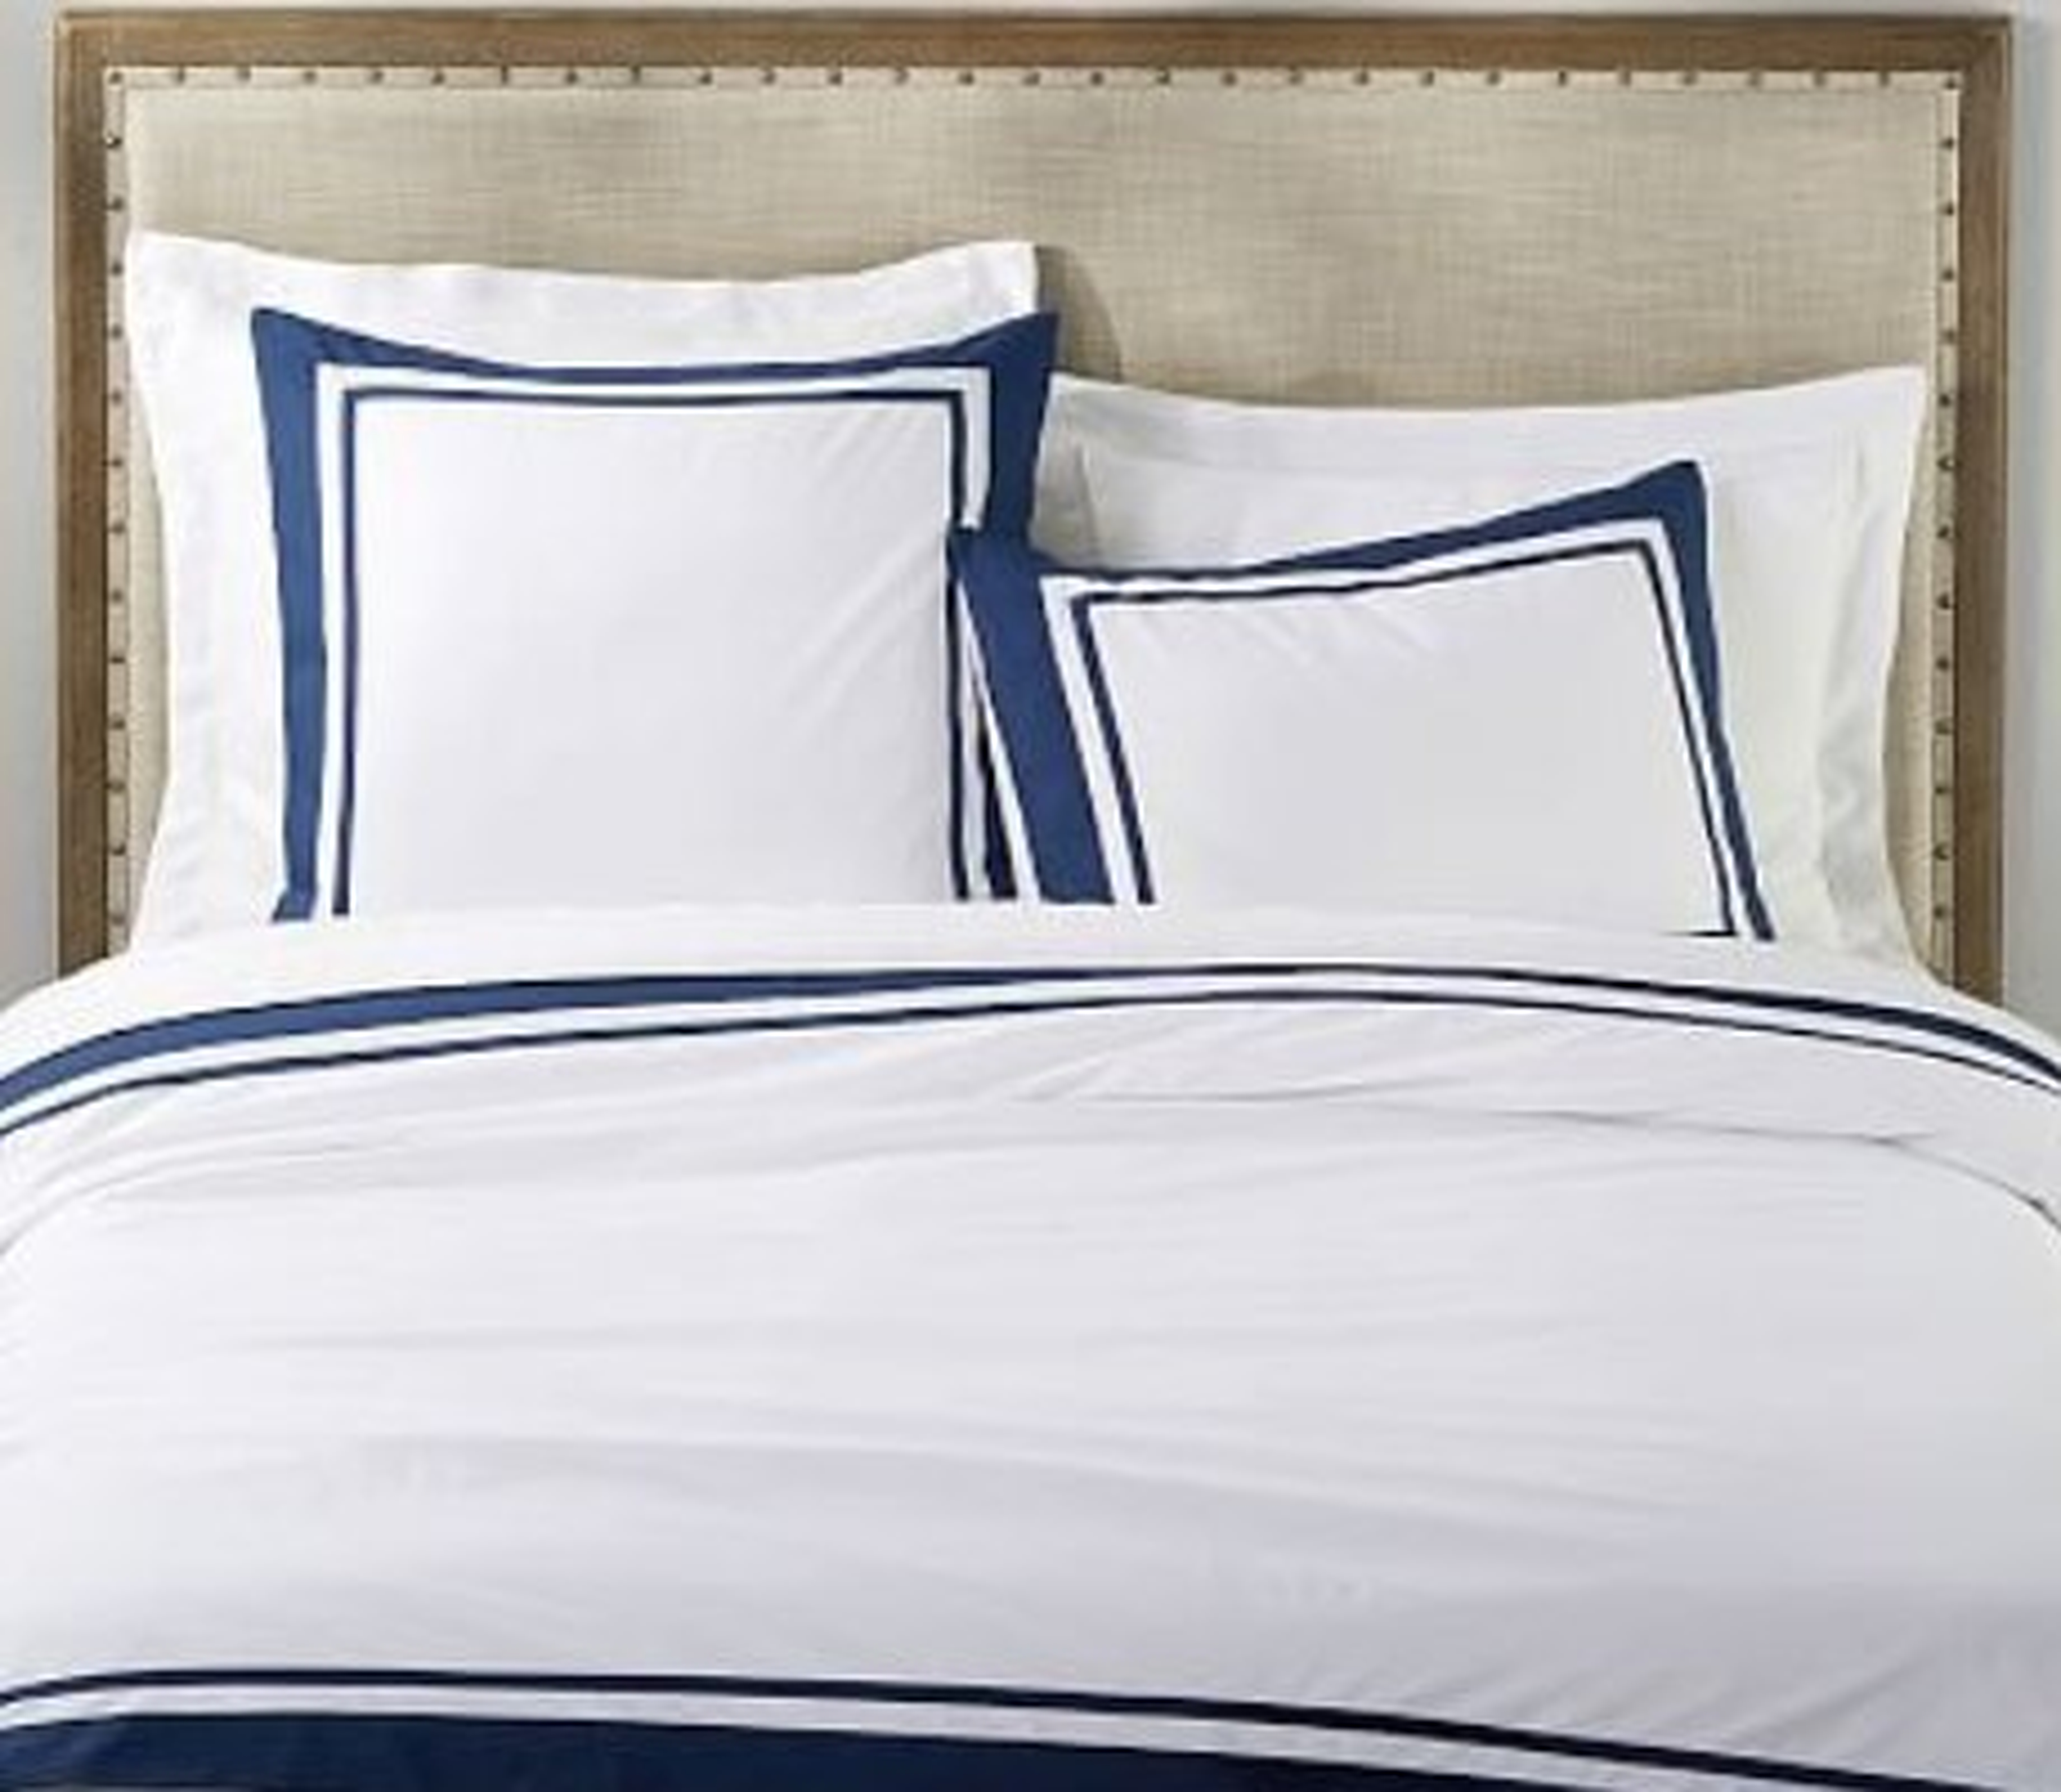 Parker Organic Percale Duvet Cover - Pottery Barn